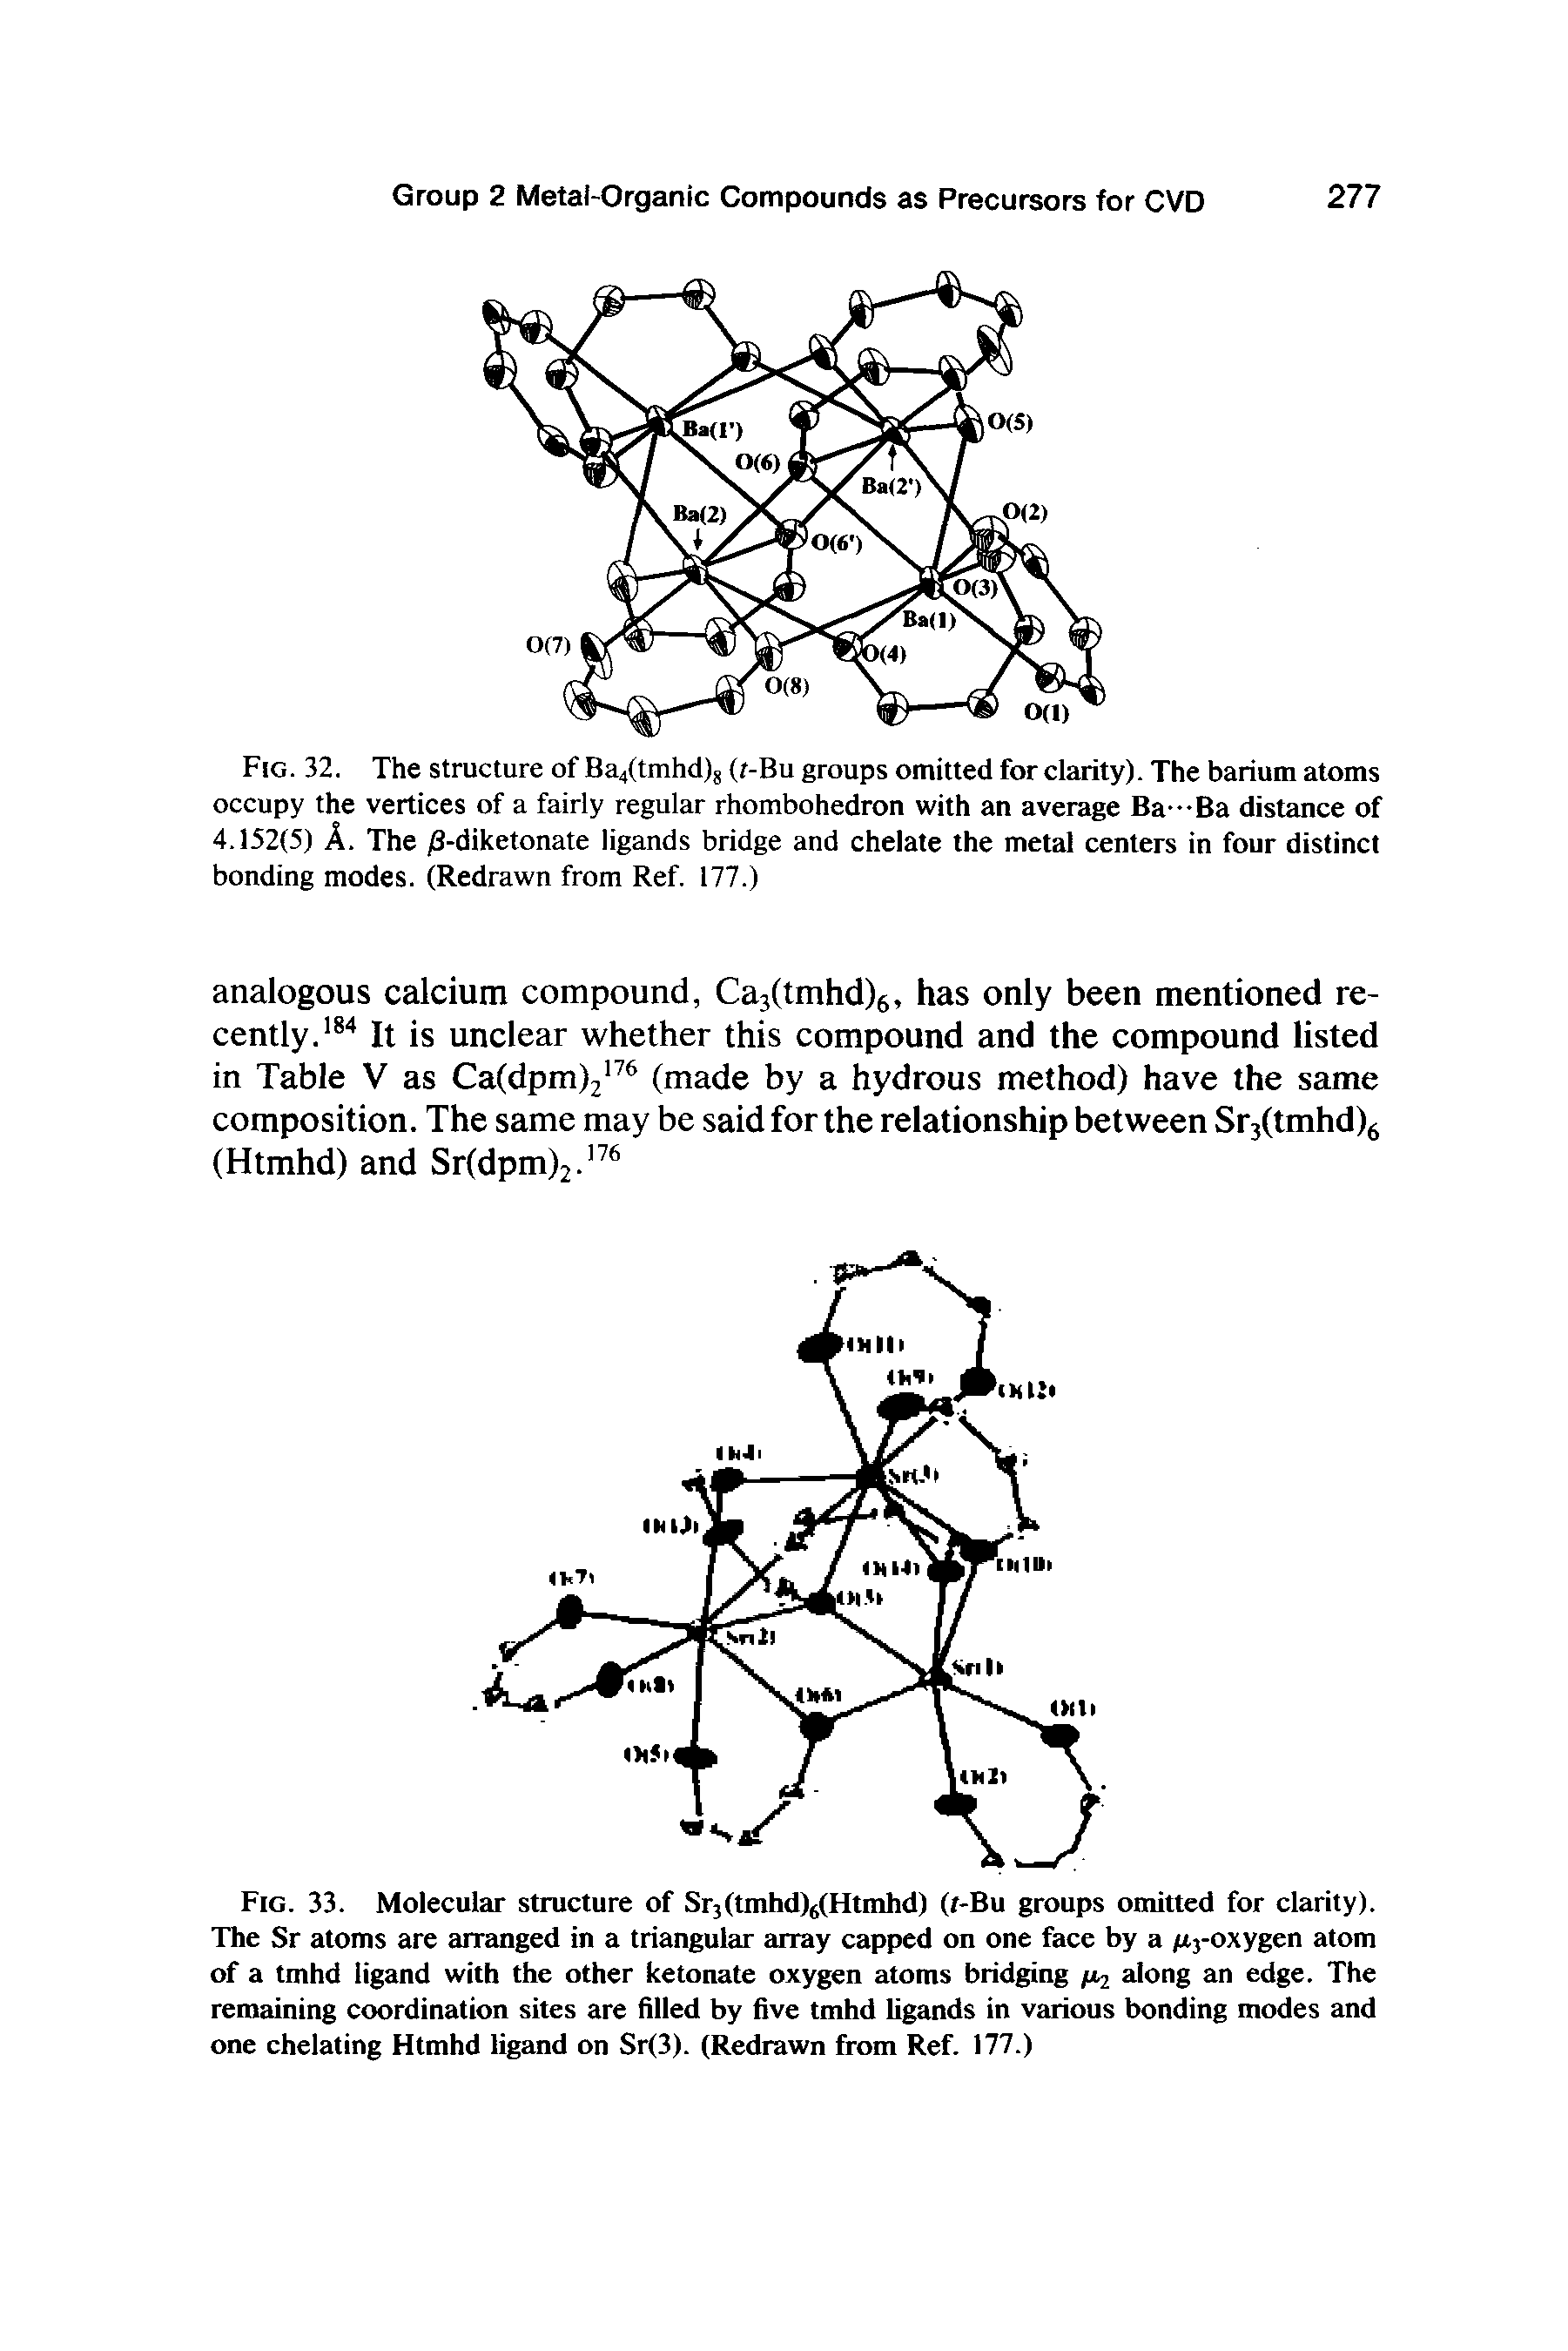 Fig. 32. The structure of Ba4(tmhd)8 (r-Bu groups omitted for clarity). The barium atoms occupy the vertices of a fairly regular rhombohedron with an average Ba---Ba distance of 4.152(5) A. The /3-diketonate ligands bridge and chelate the metal centers in four distinct bonding modes. (Redrawn from Ref. 177.)...